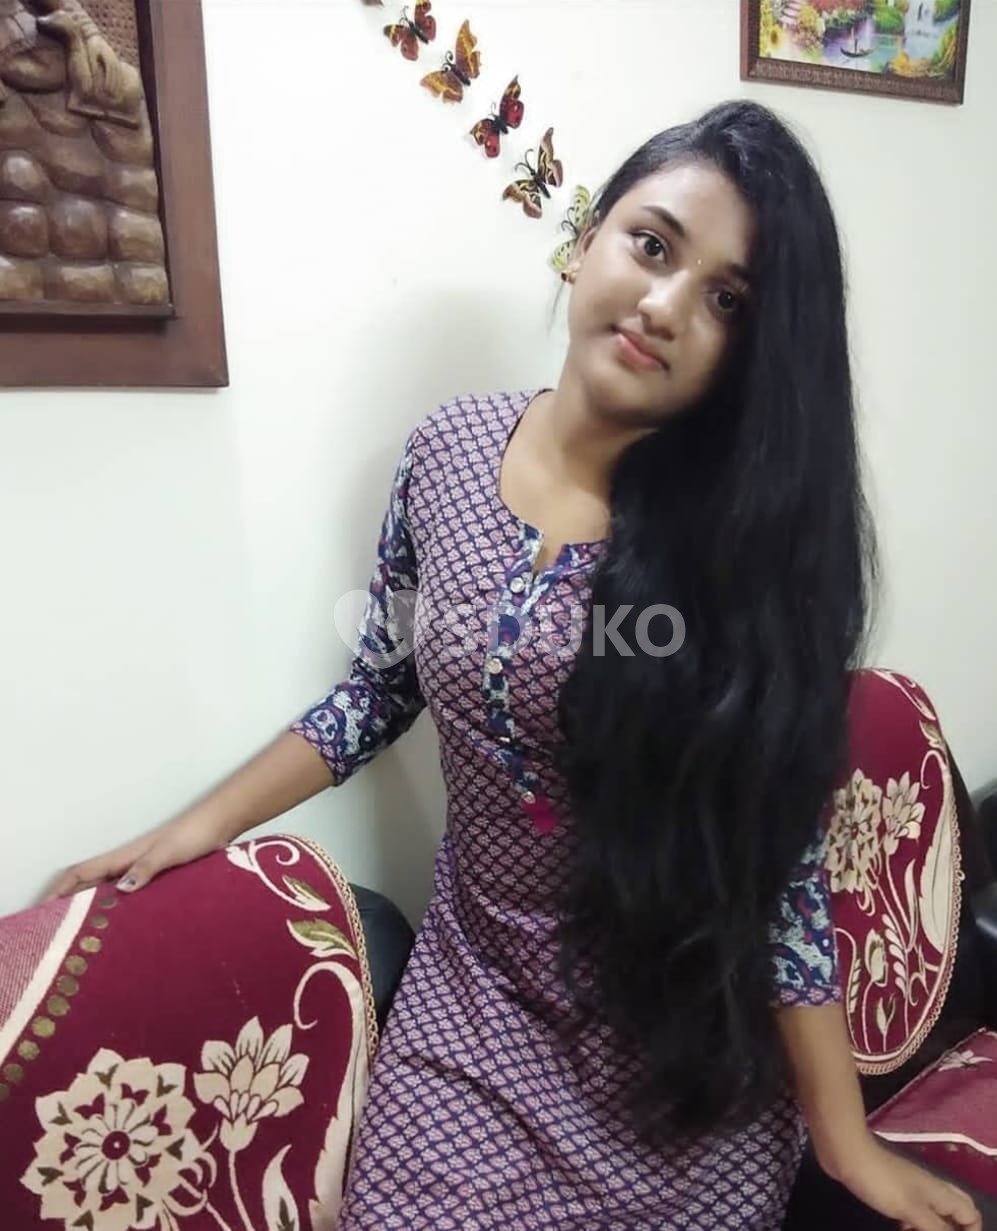 YELAHANKA 💯% FULLY SATISFACTION AND DOORSTEP INCALL OUTCALL SERVICE. AVAILABLE SAFE AND SECURE